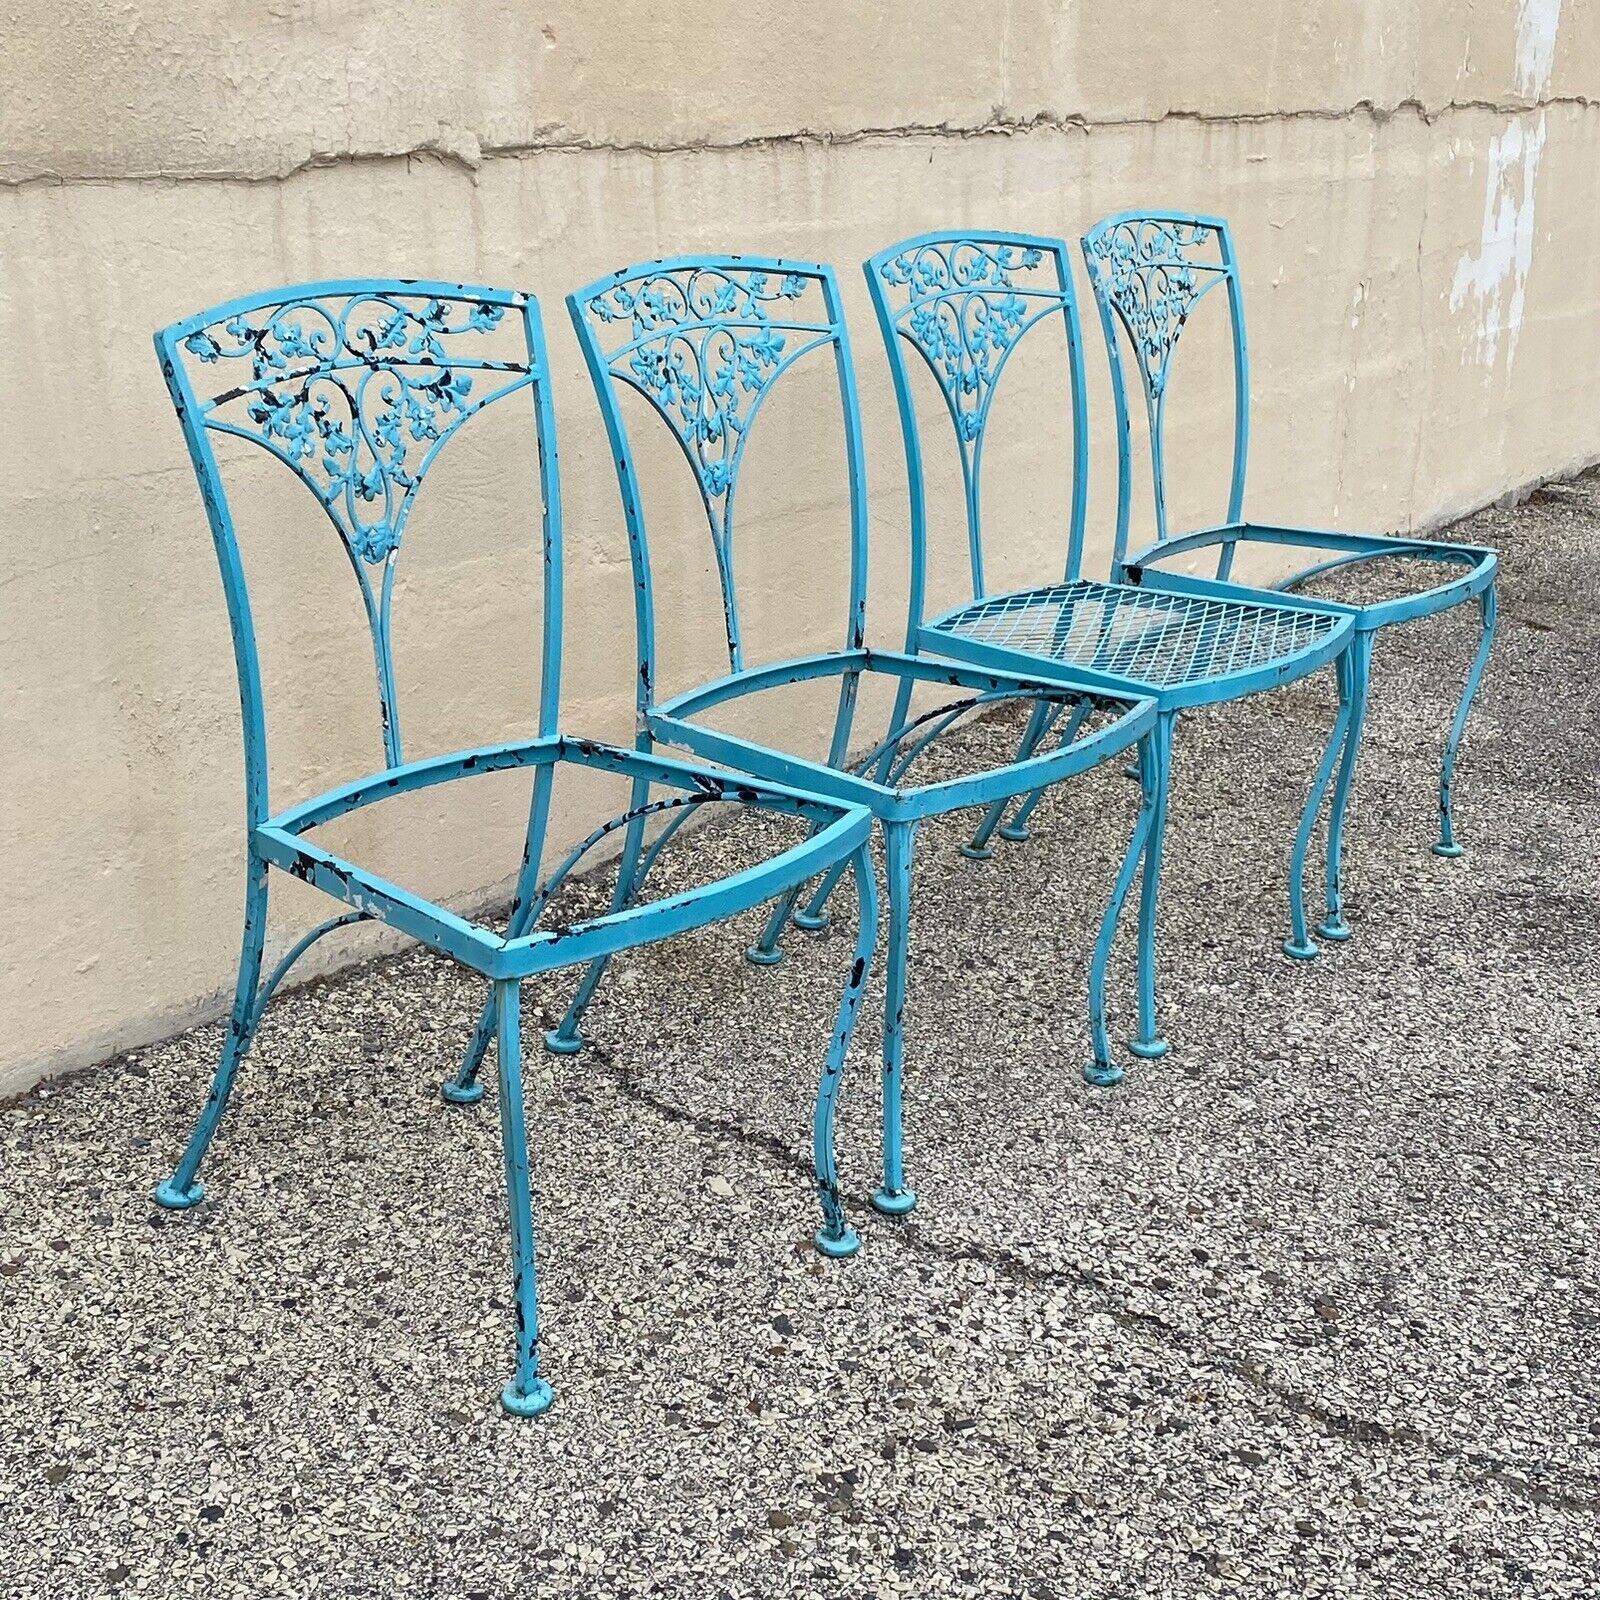 Vintage Woodard Orleans Pattern Wrought Iron Garden Patio Dining Chairs Set of 4 For Sale 2